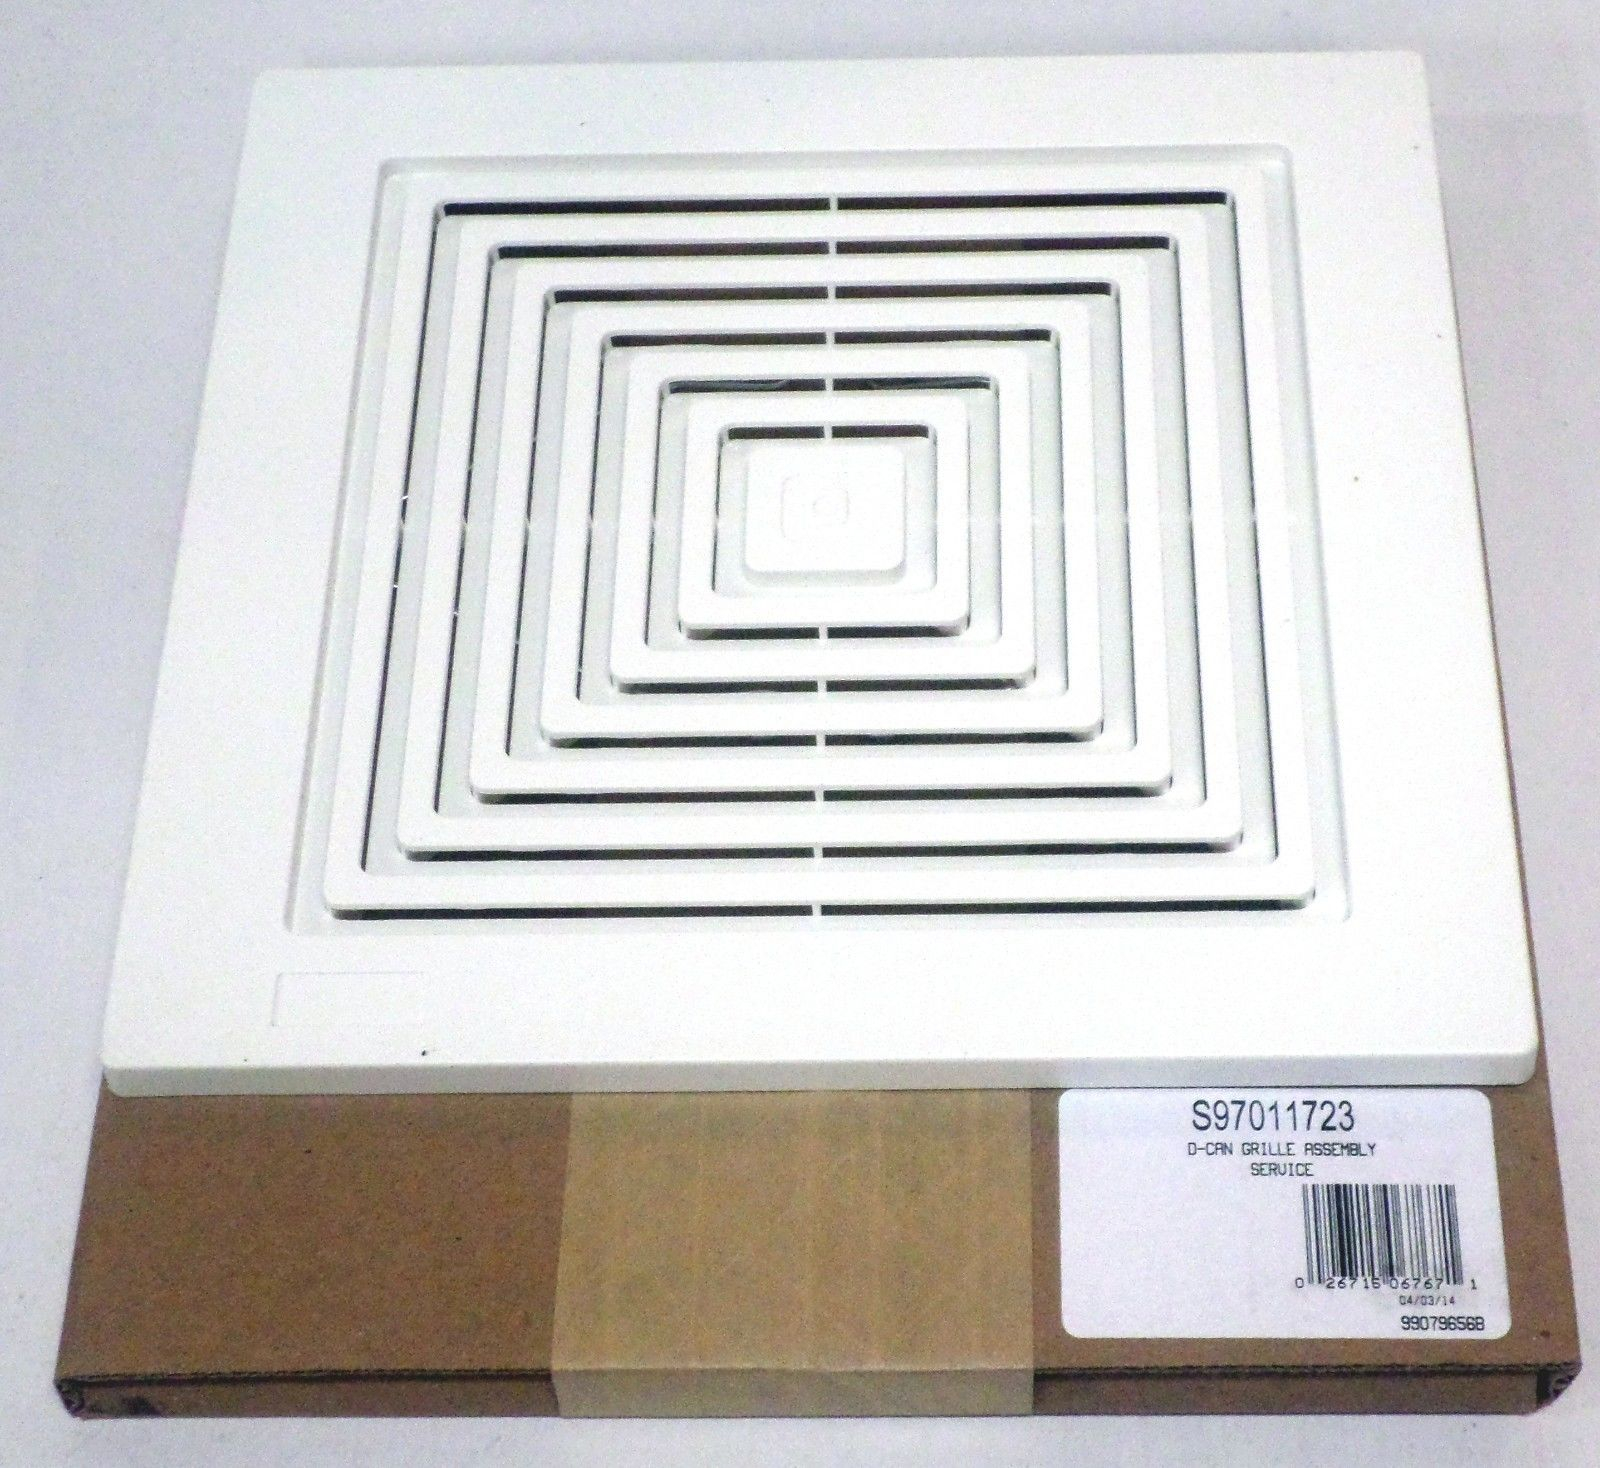 Details About Broan Nutone 97011723 Bath Bathroom Ceiling Fan Grille Grill Cover Plastic White within sizing 1600 X 1468